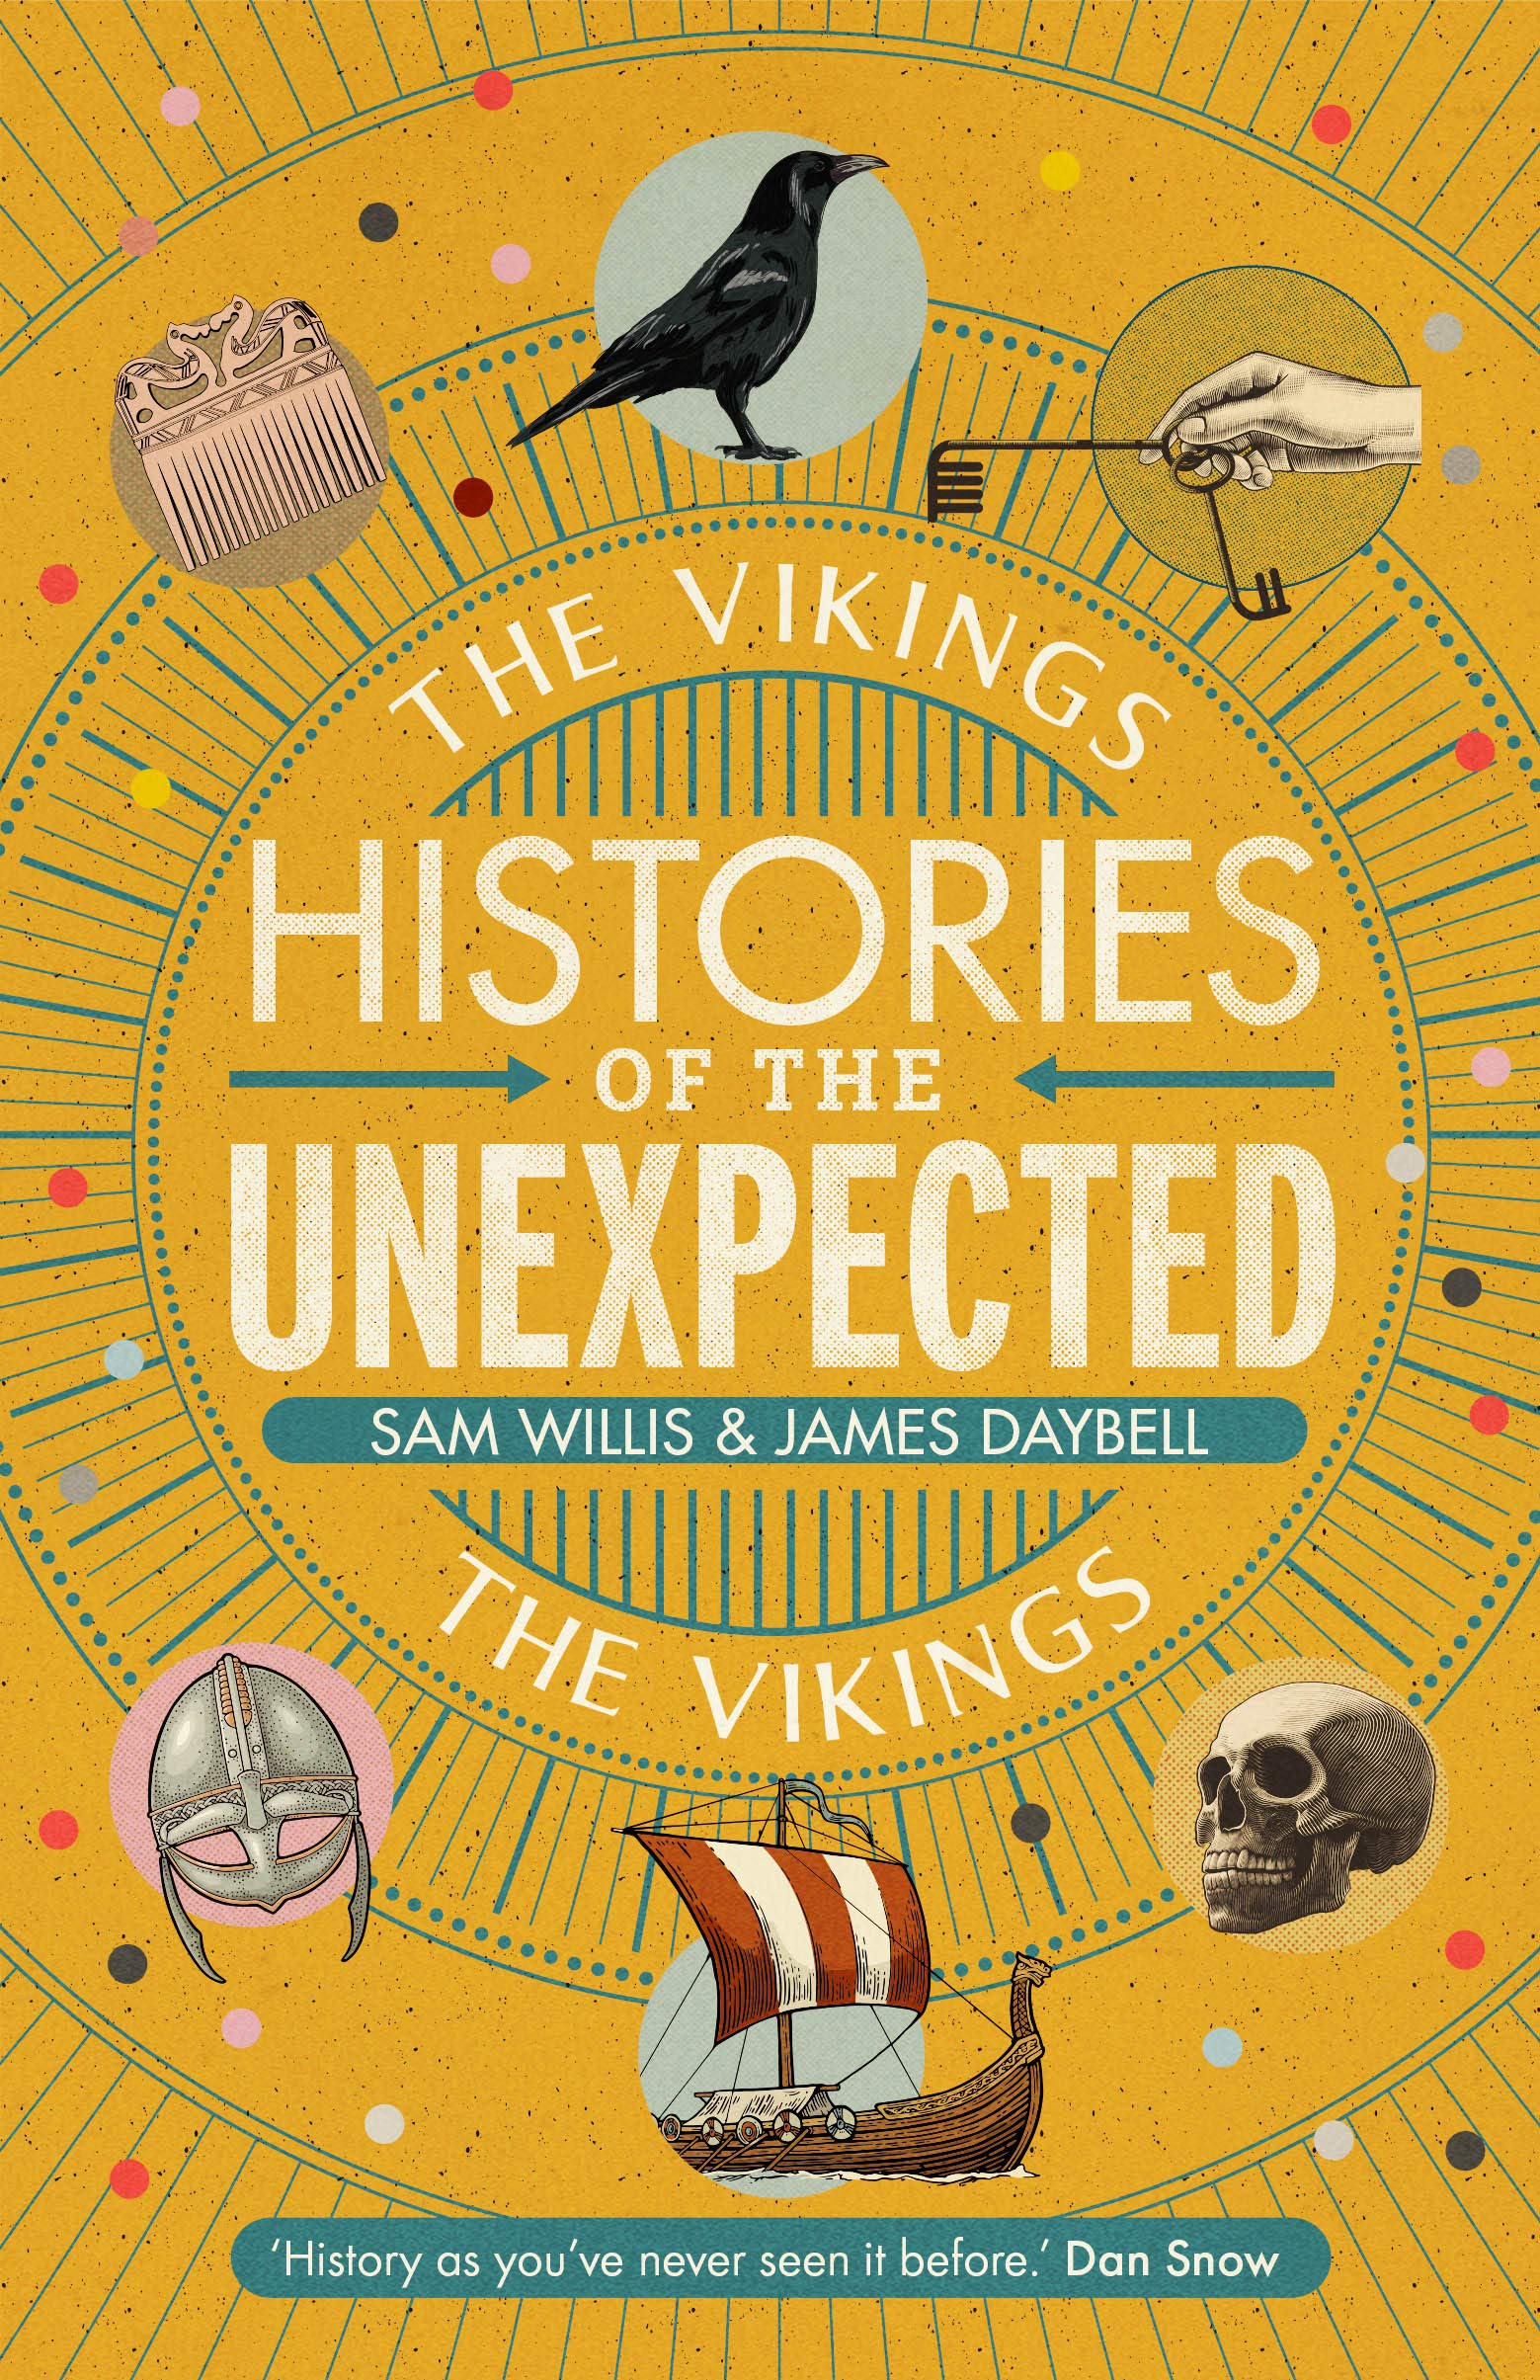 Willis Dr S. Histories of the Unexpected: The Vikings 